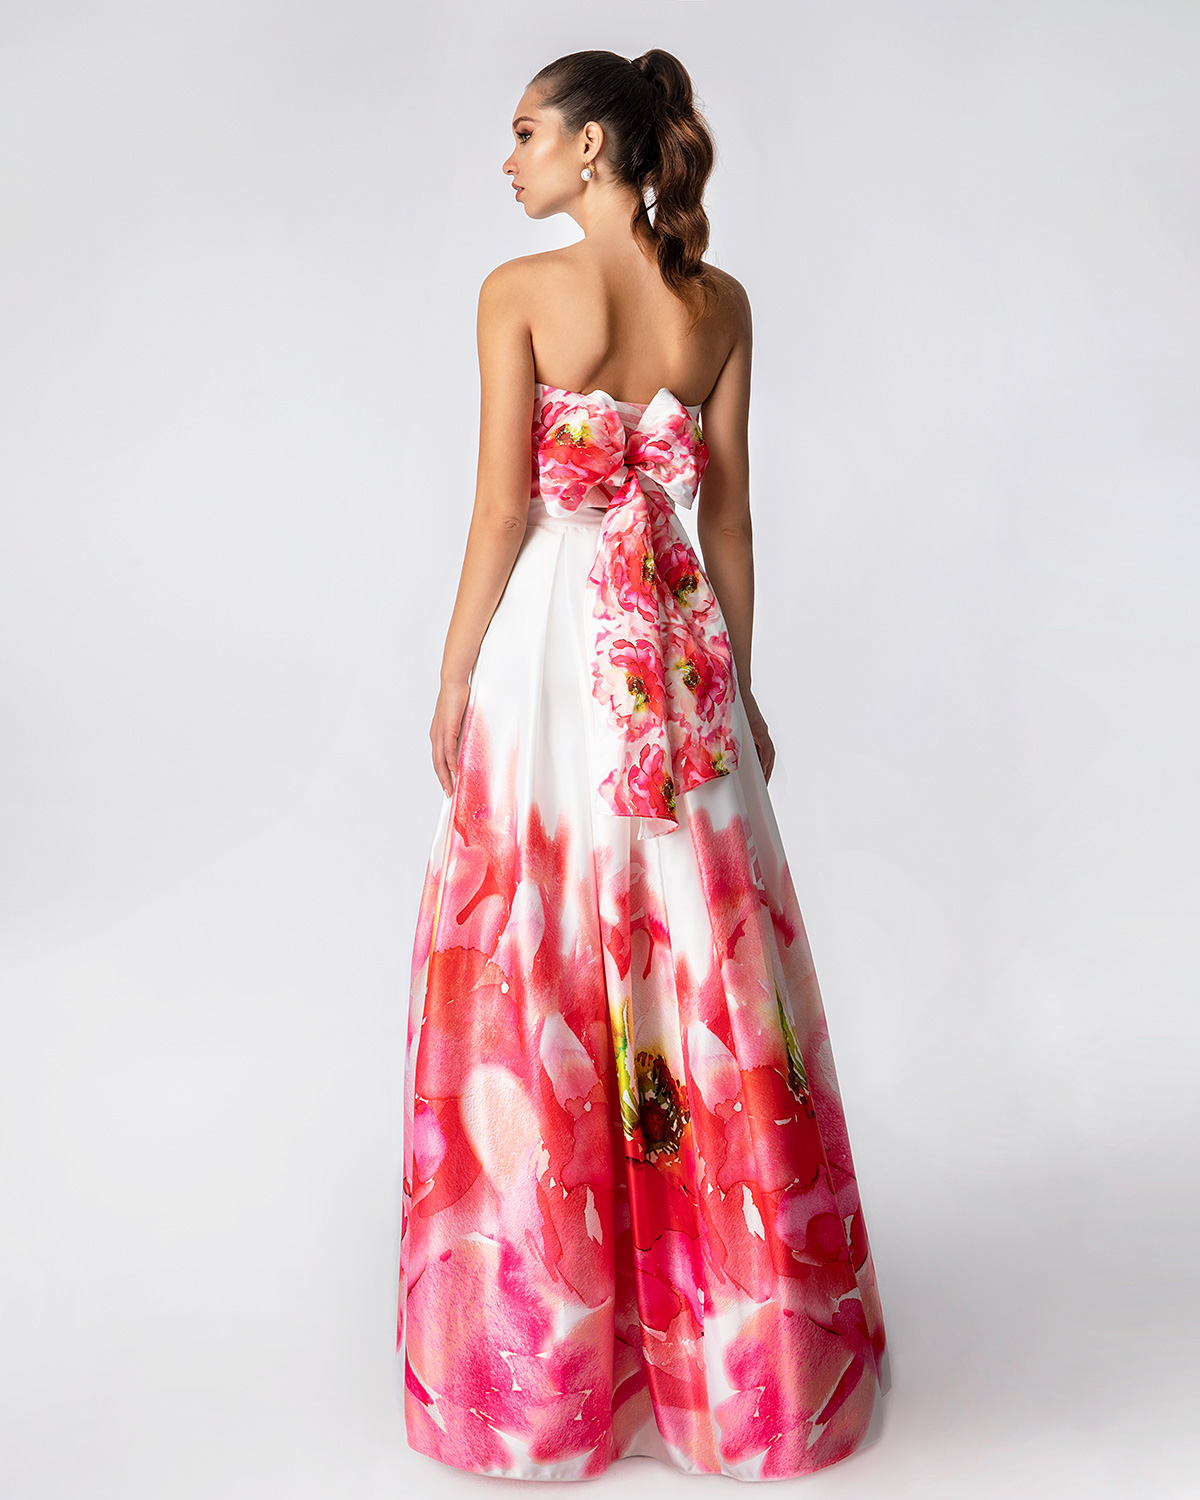 Cocktail Dresses / Long printed skirt and top with a big bow on the back